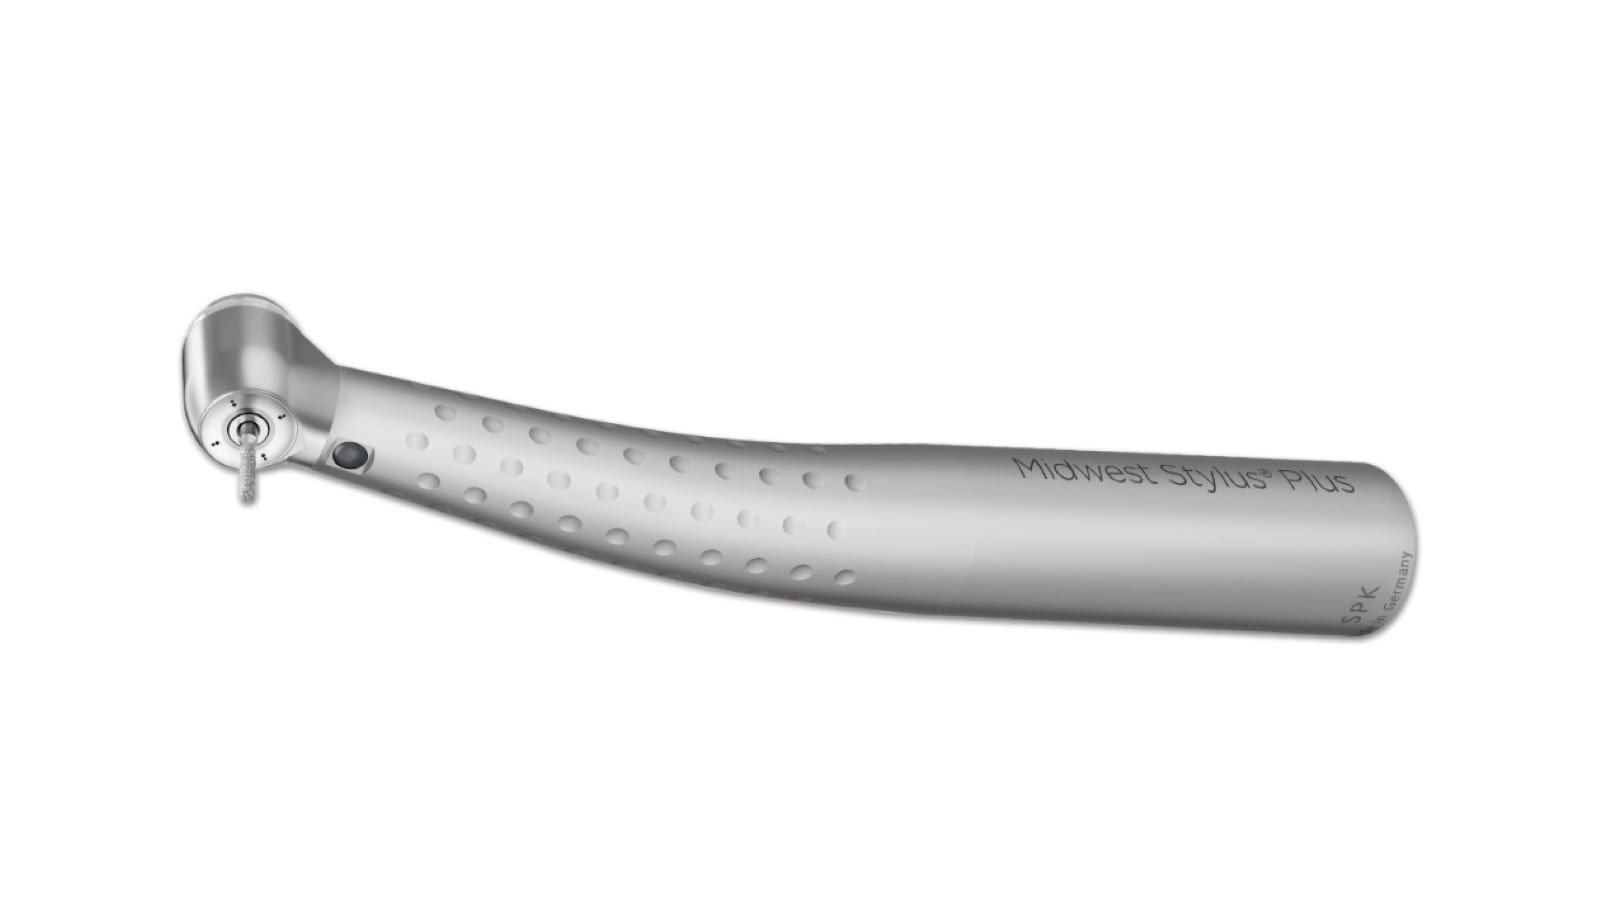 Midwest stylus plus by dentsply sirona